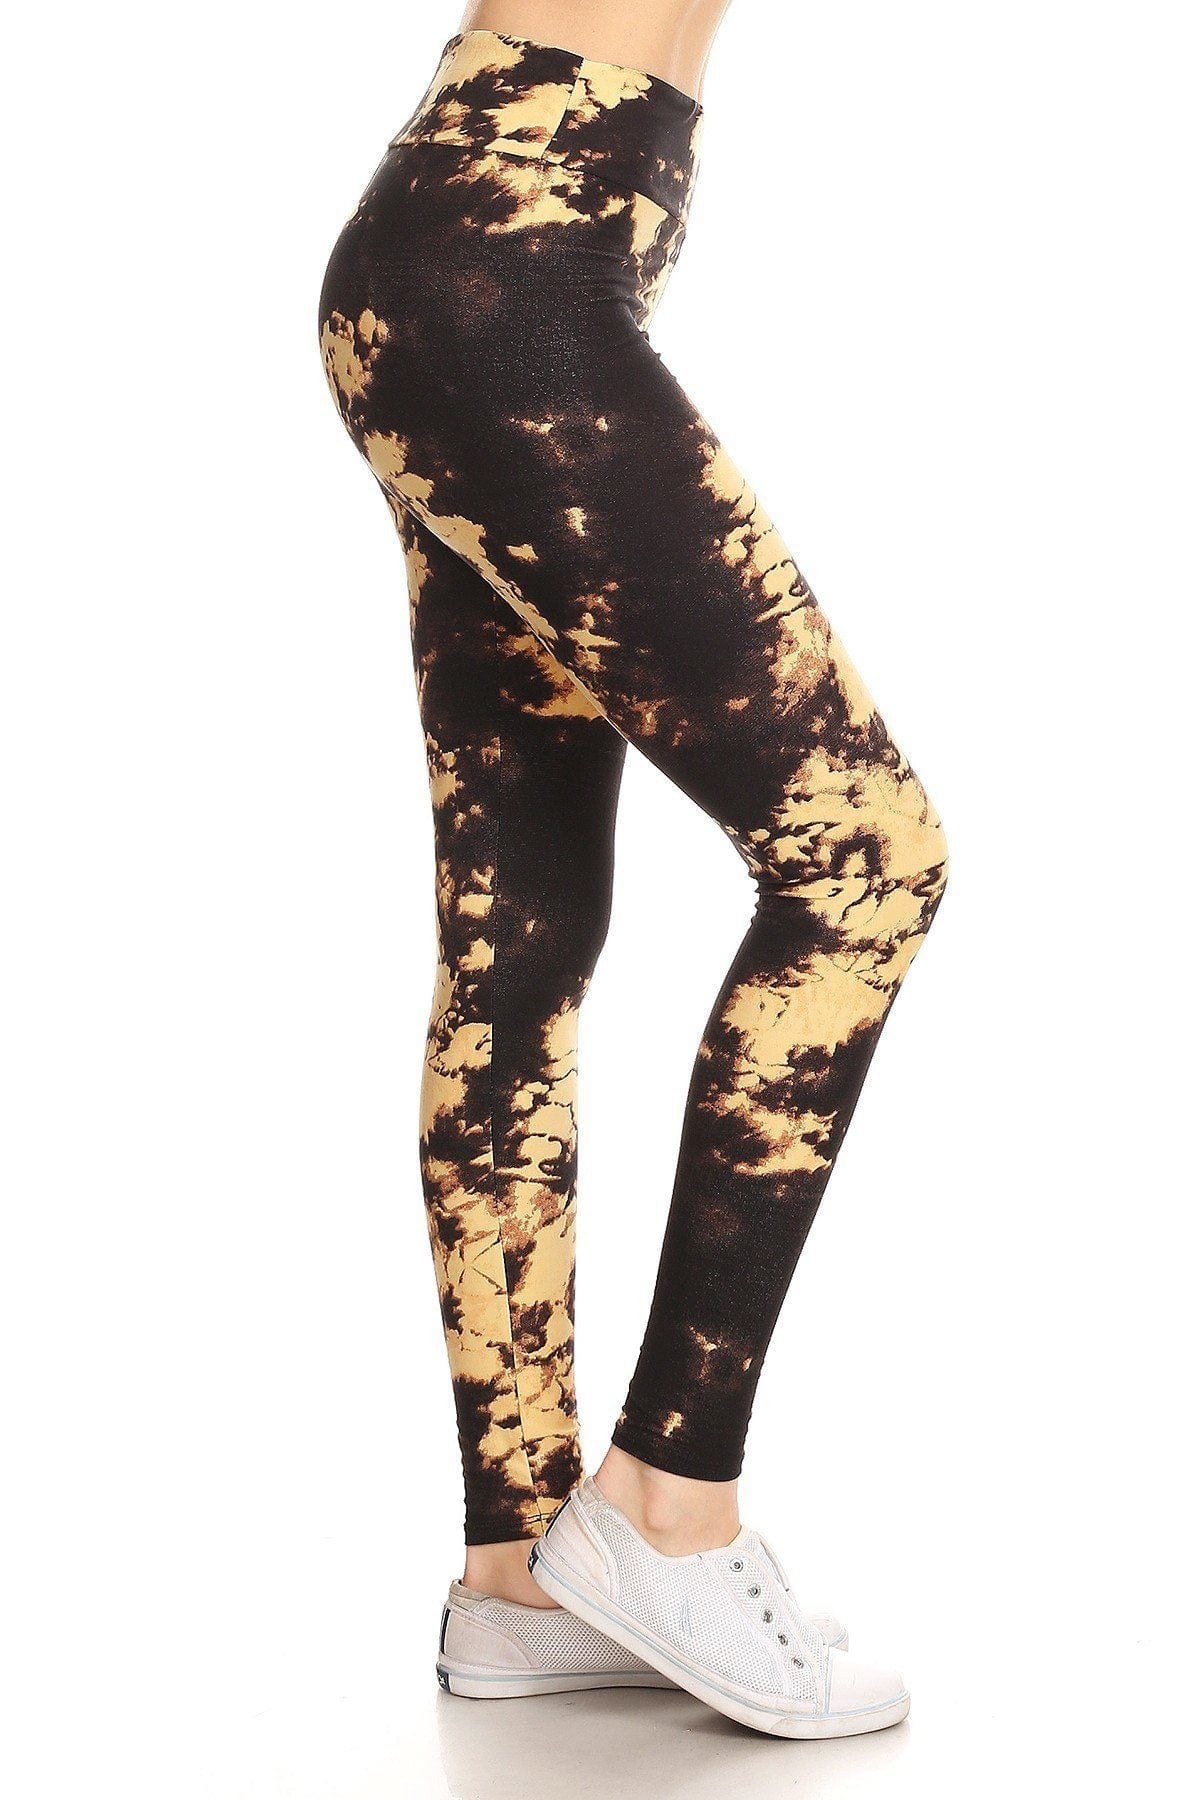 Yoga Style Banded Lined Tie Dye Print, Full Length Leggings In A Slim Fitting Style With A Banded High Waist. - Fashion Quality Boutik